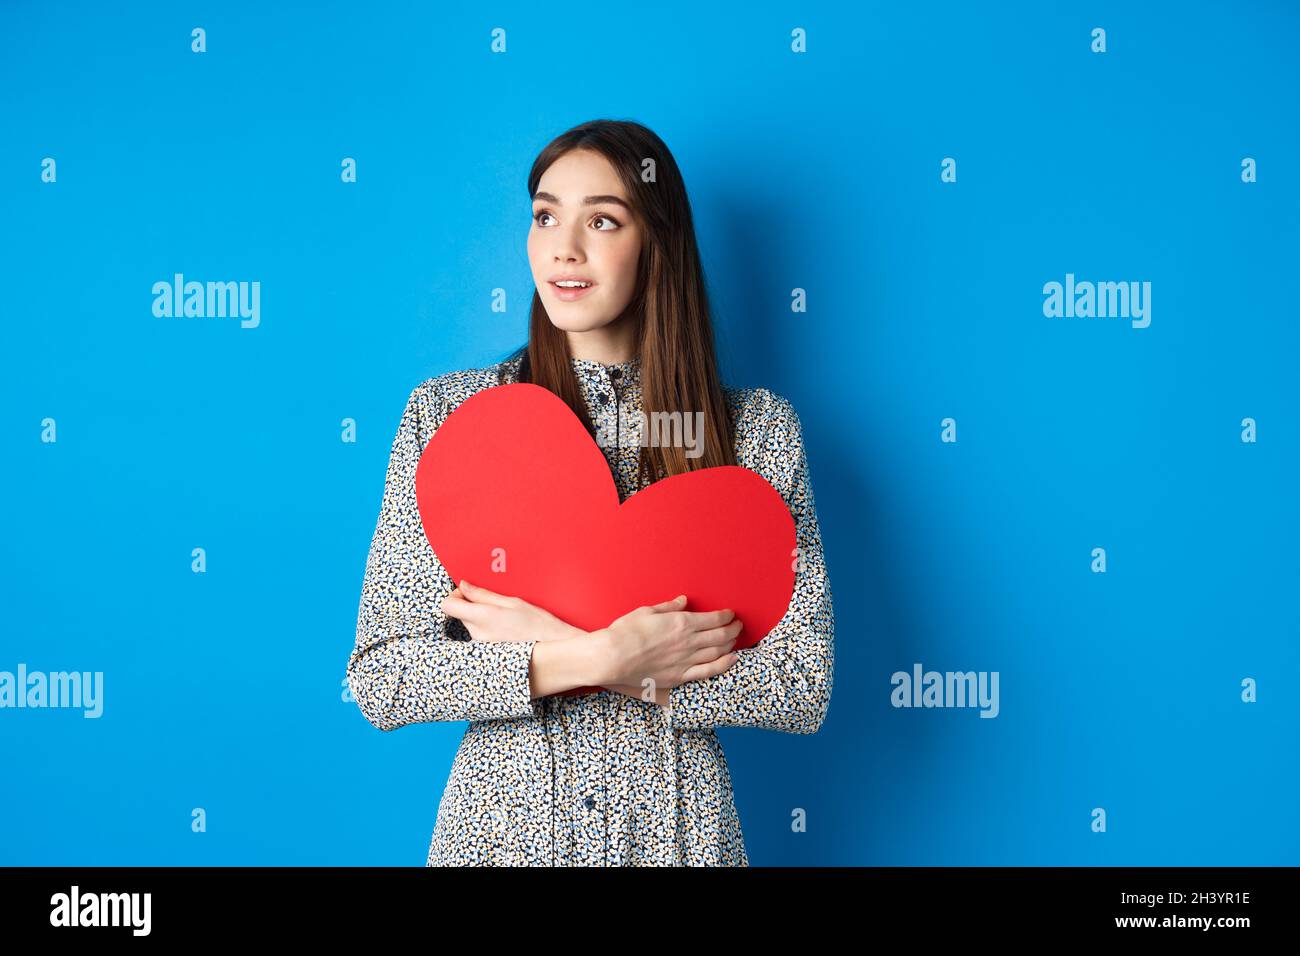 Valentines day. Hopeful girl dreaming off soulmate, looking aside at empty space with excitement, hugging big red heart cutout, Stock Photo